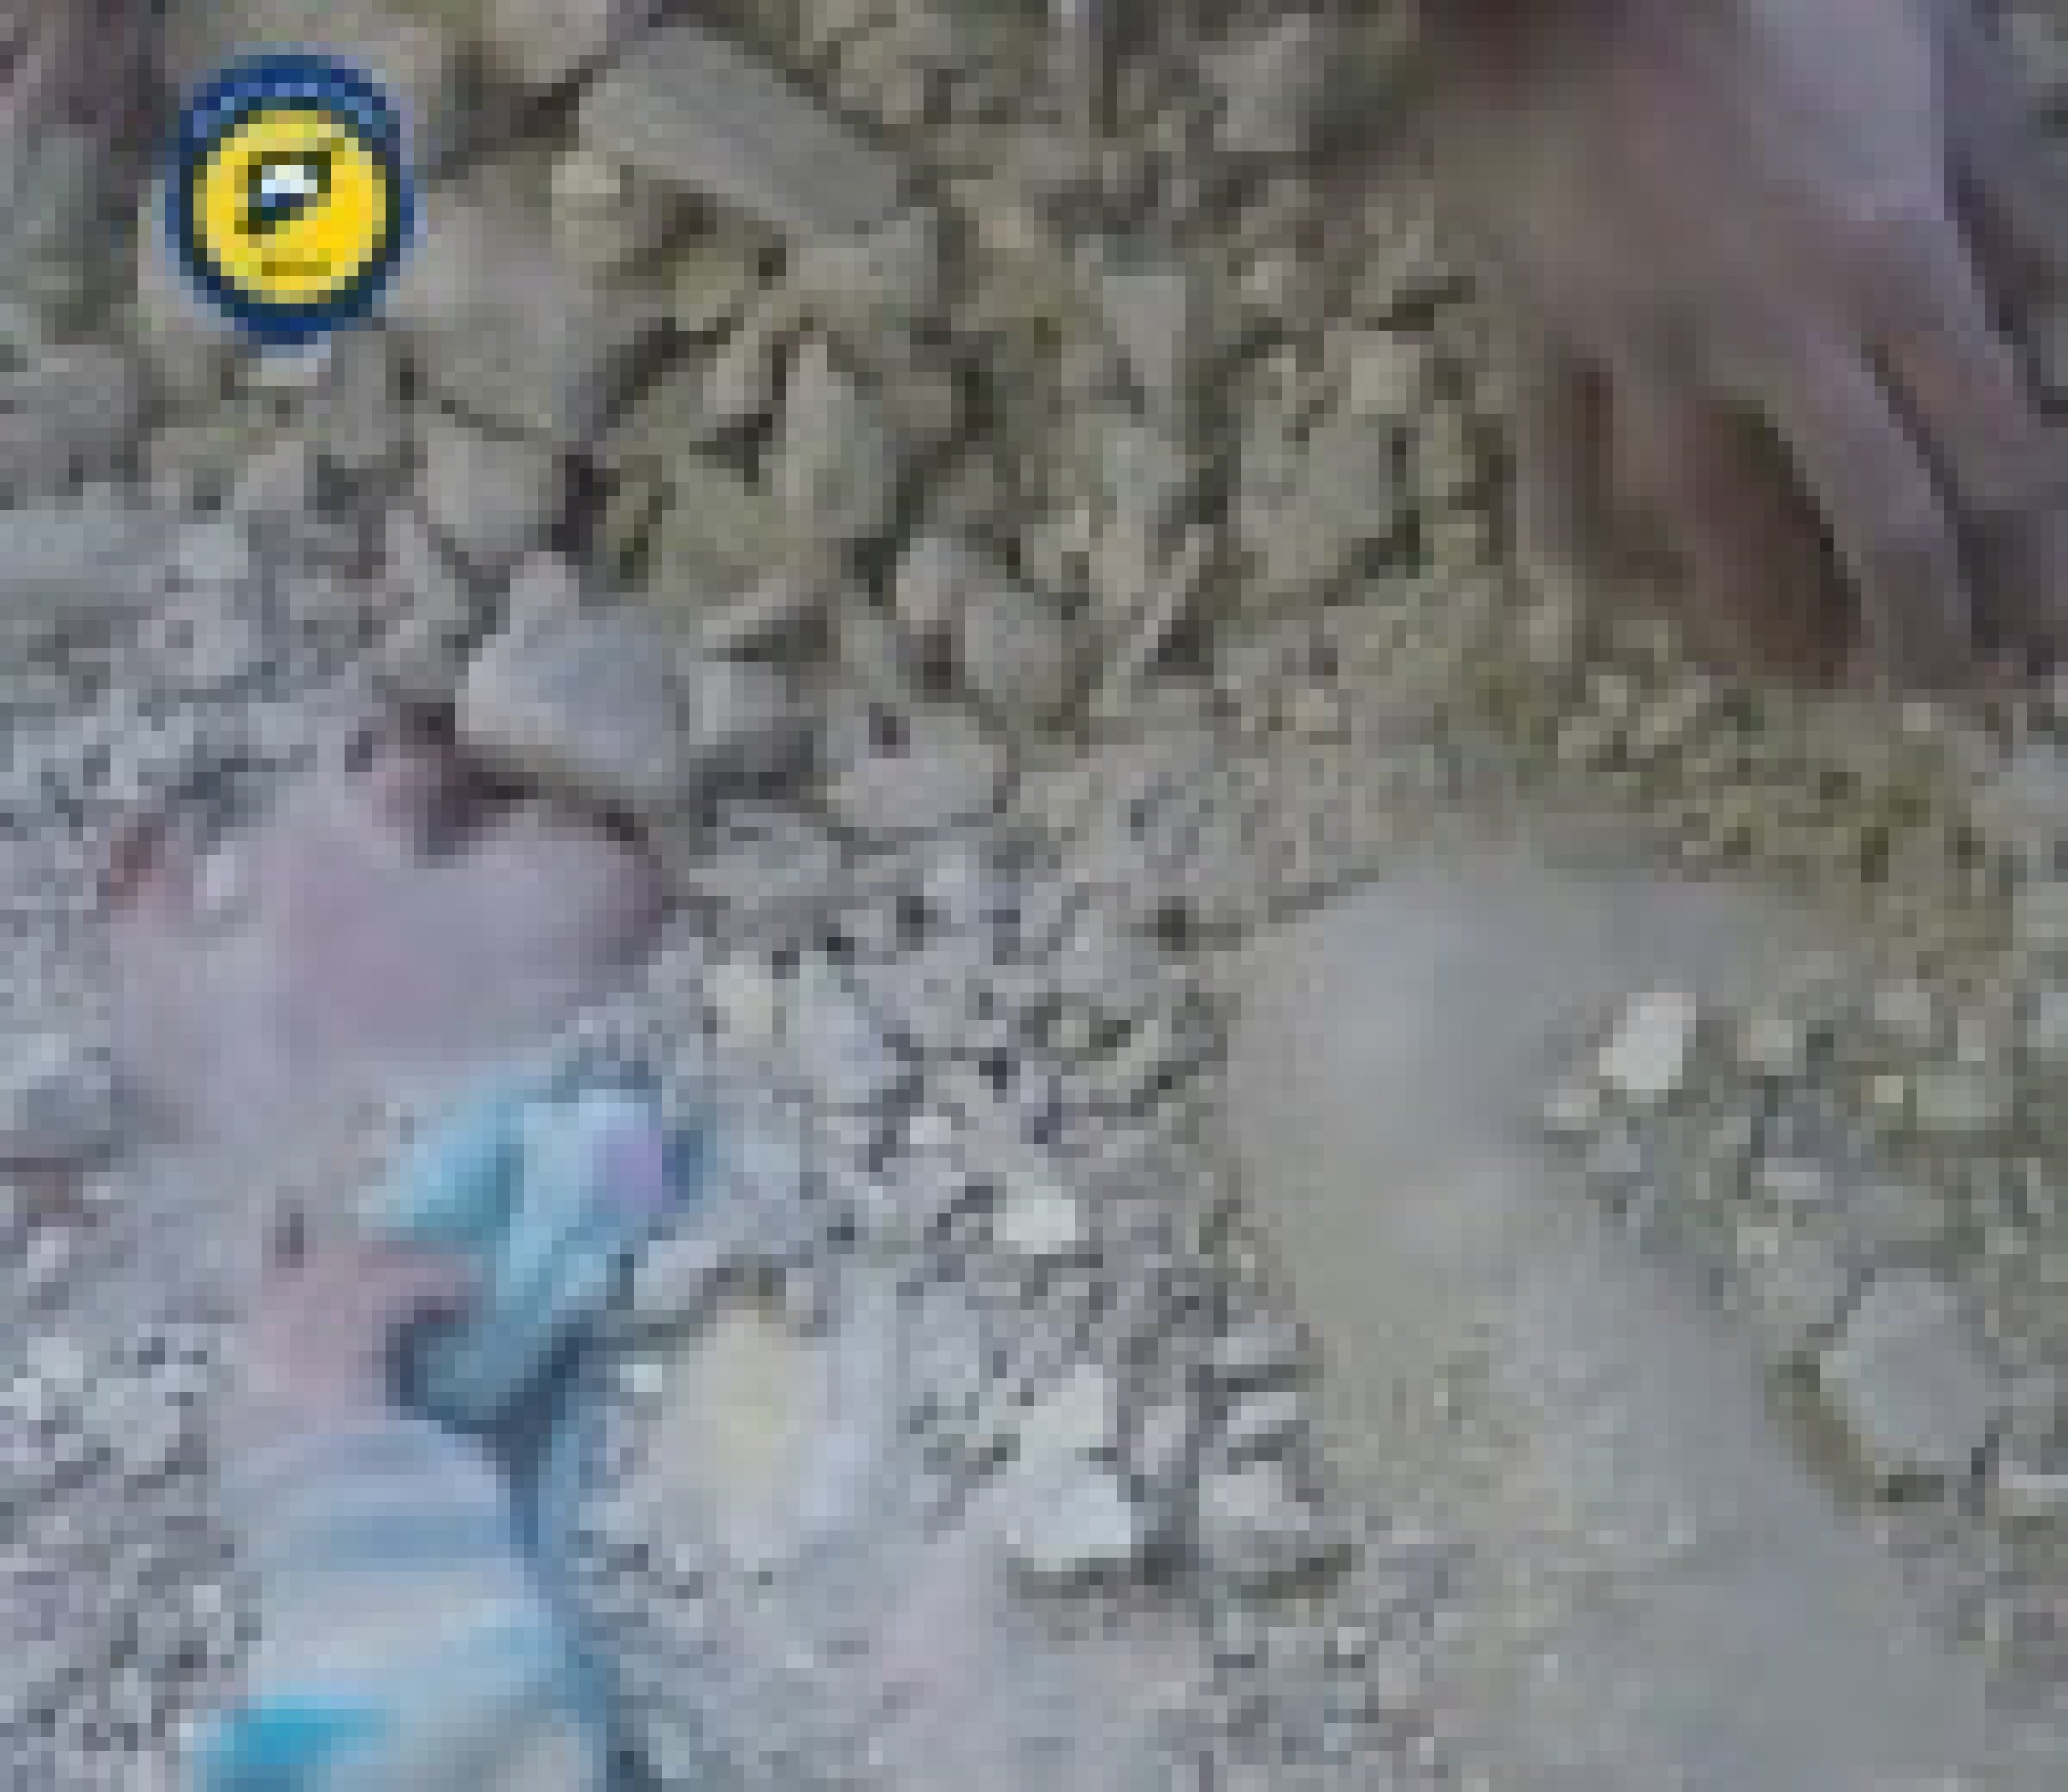 Syrian White Helmets miraculously rescue young girl from Damascus rubble